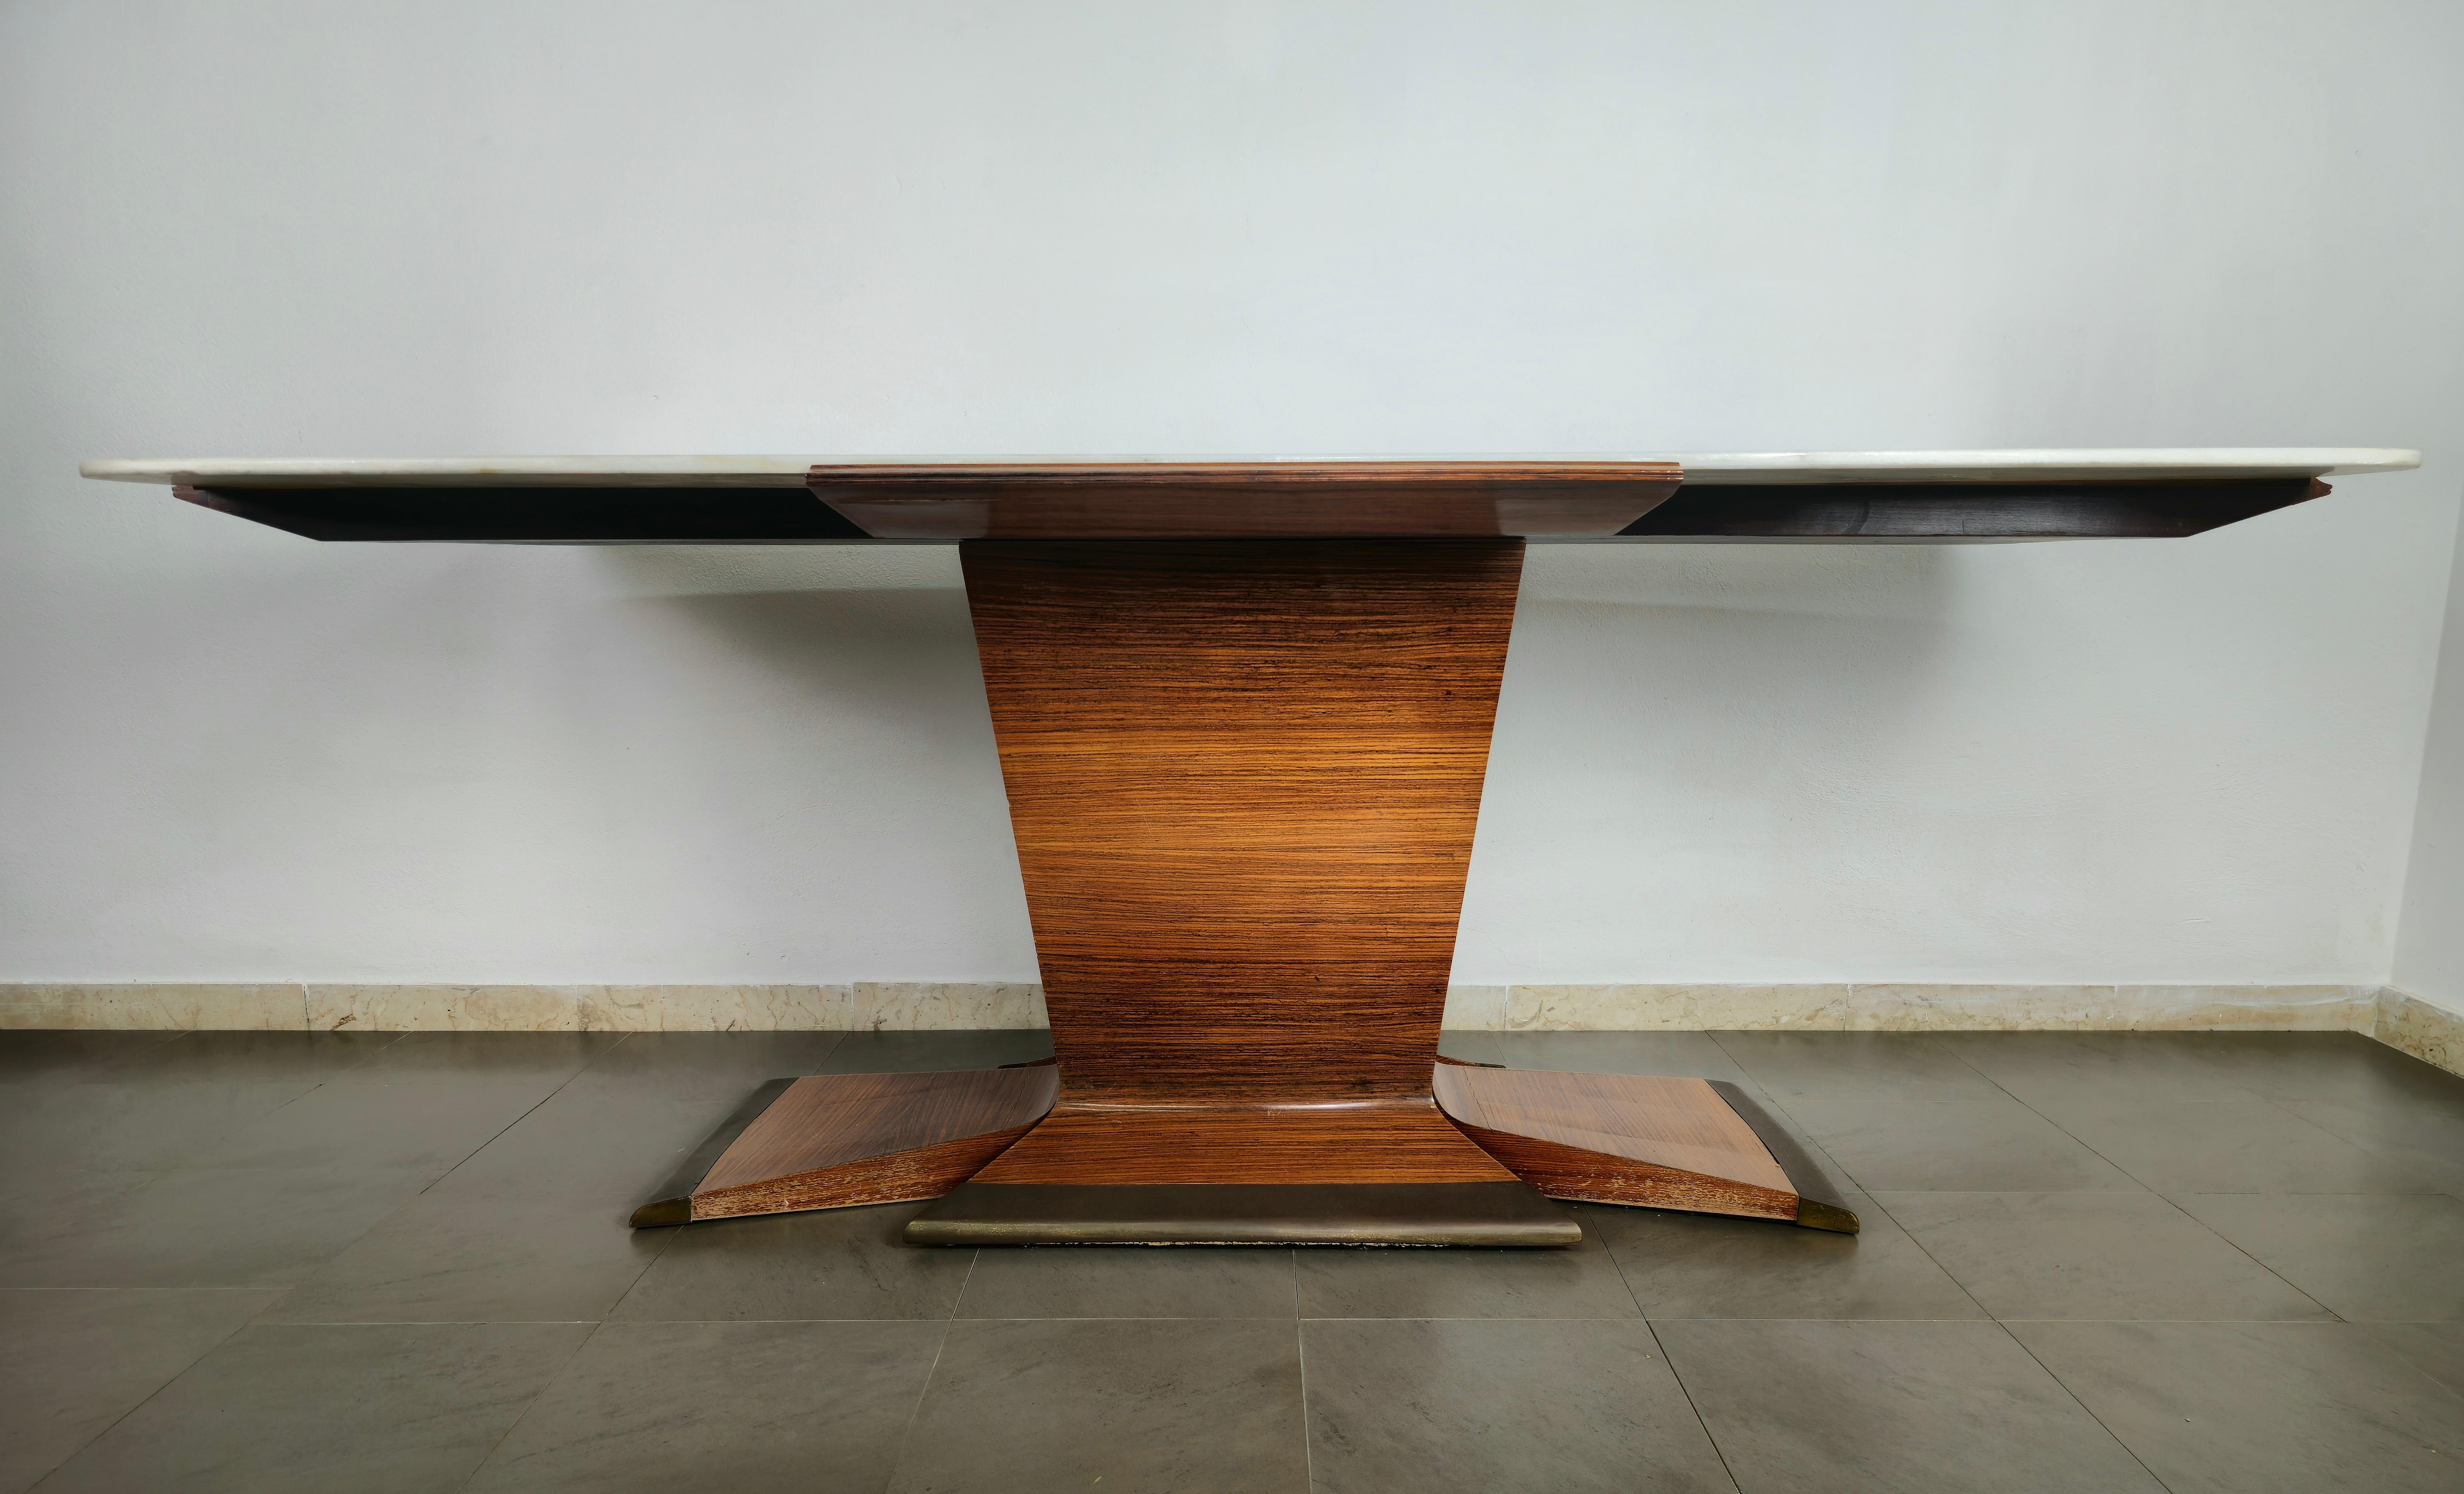 Large dining table produced in Italy in the 1950s attributable to the designer Vittorio Dassi.
The dining table was made of curved wood with brass finishes (they still retain their original patina) on the feet and top in white carrara